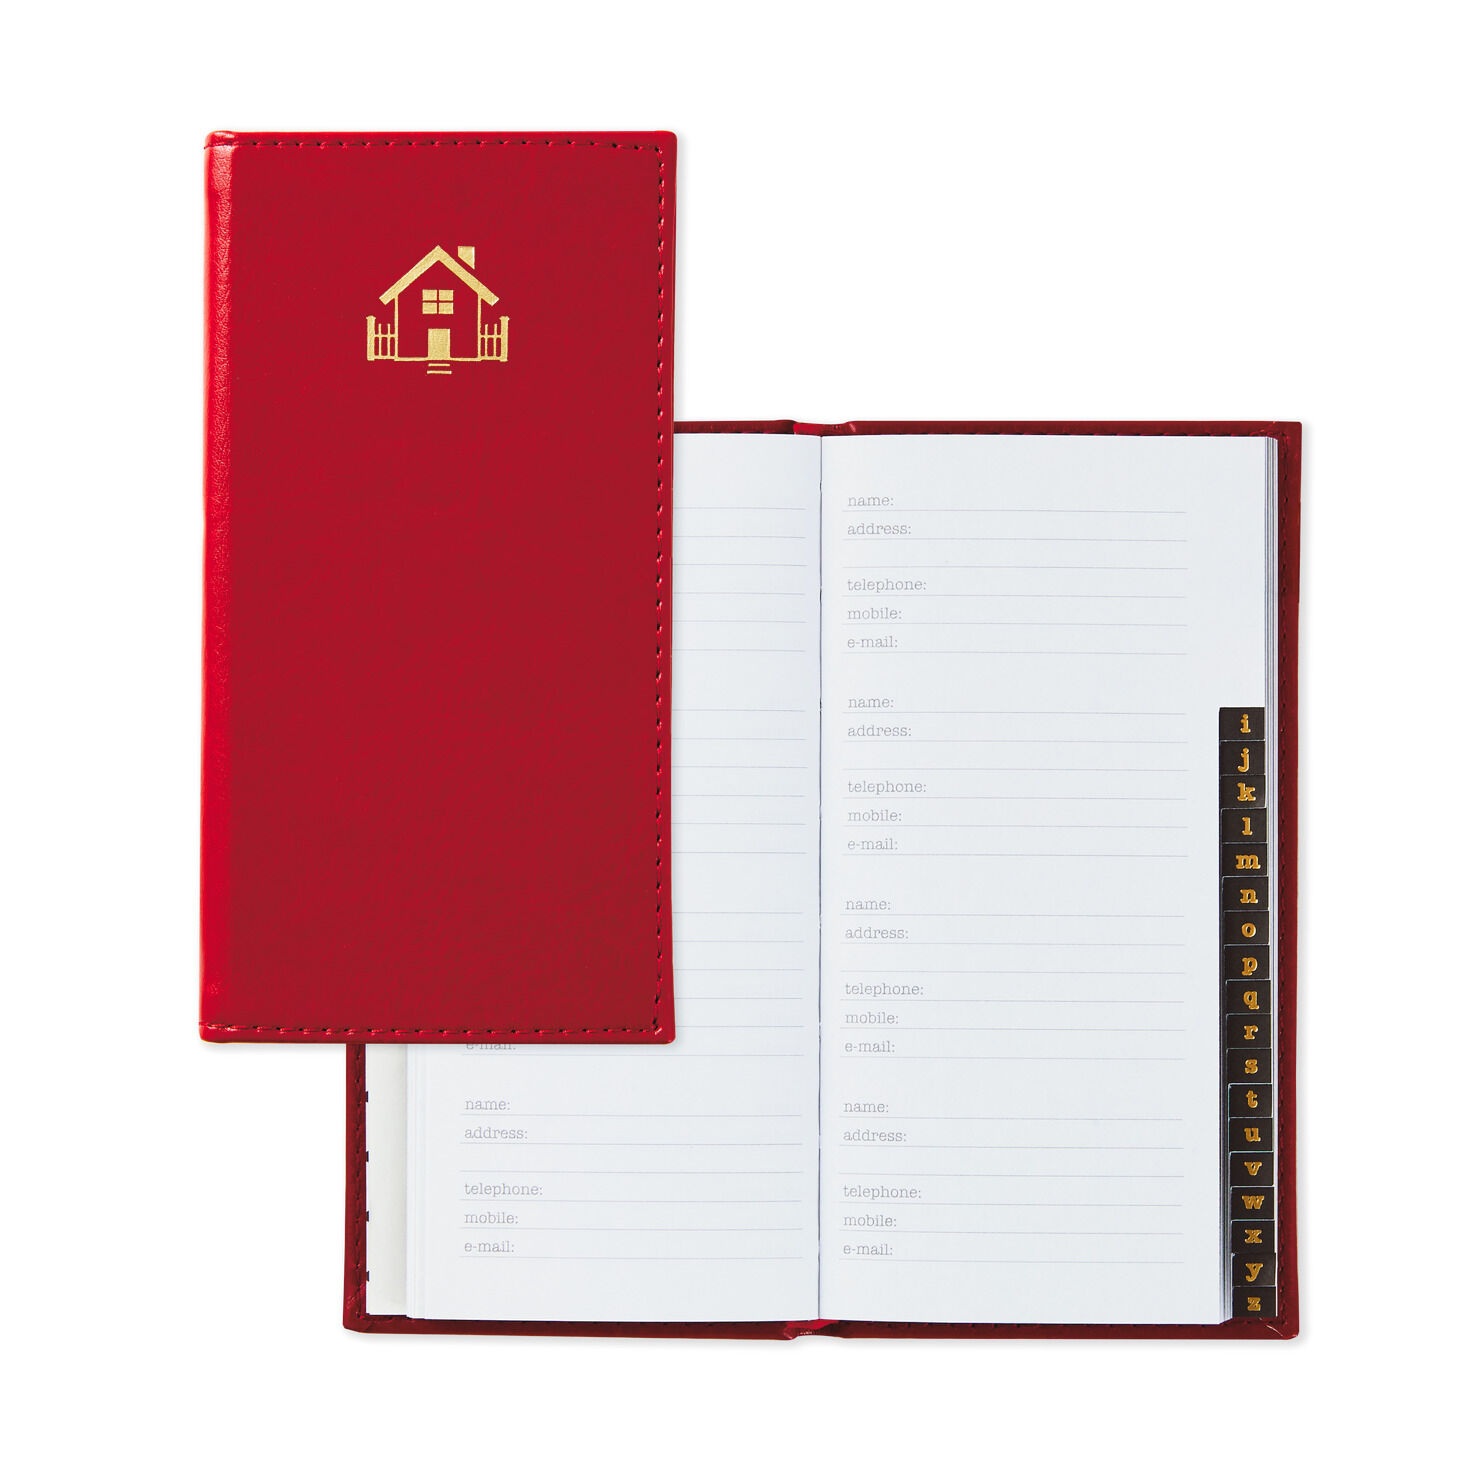 Red Faux Leather Slim Address Book for only USD 9.99 | Hallmark